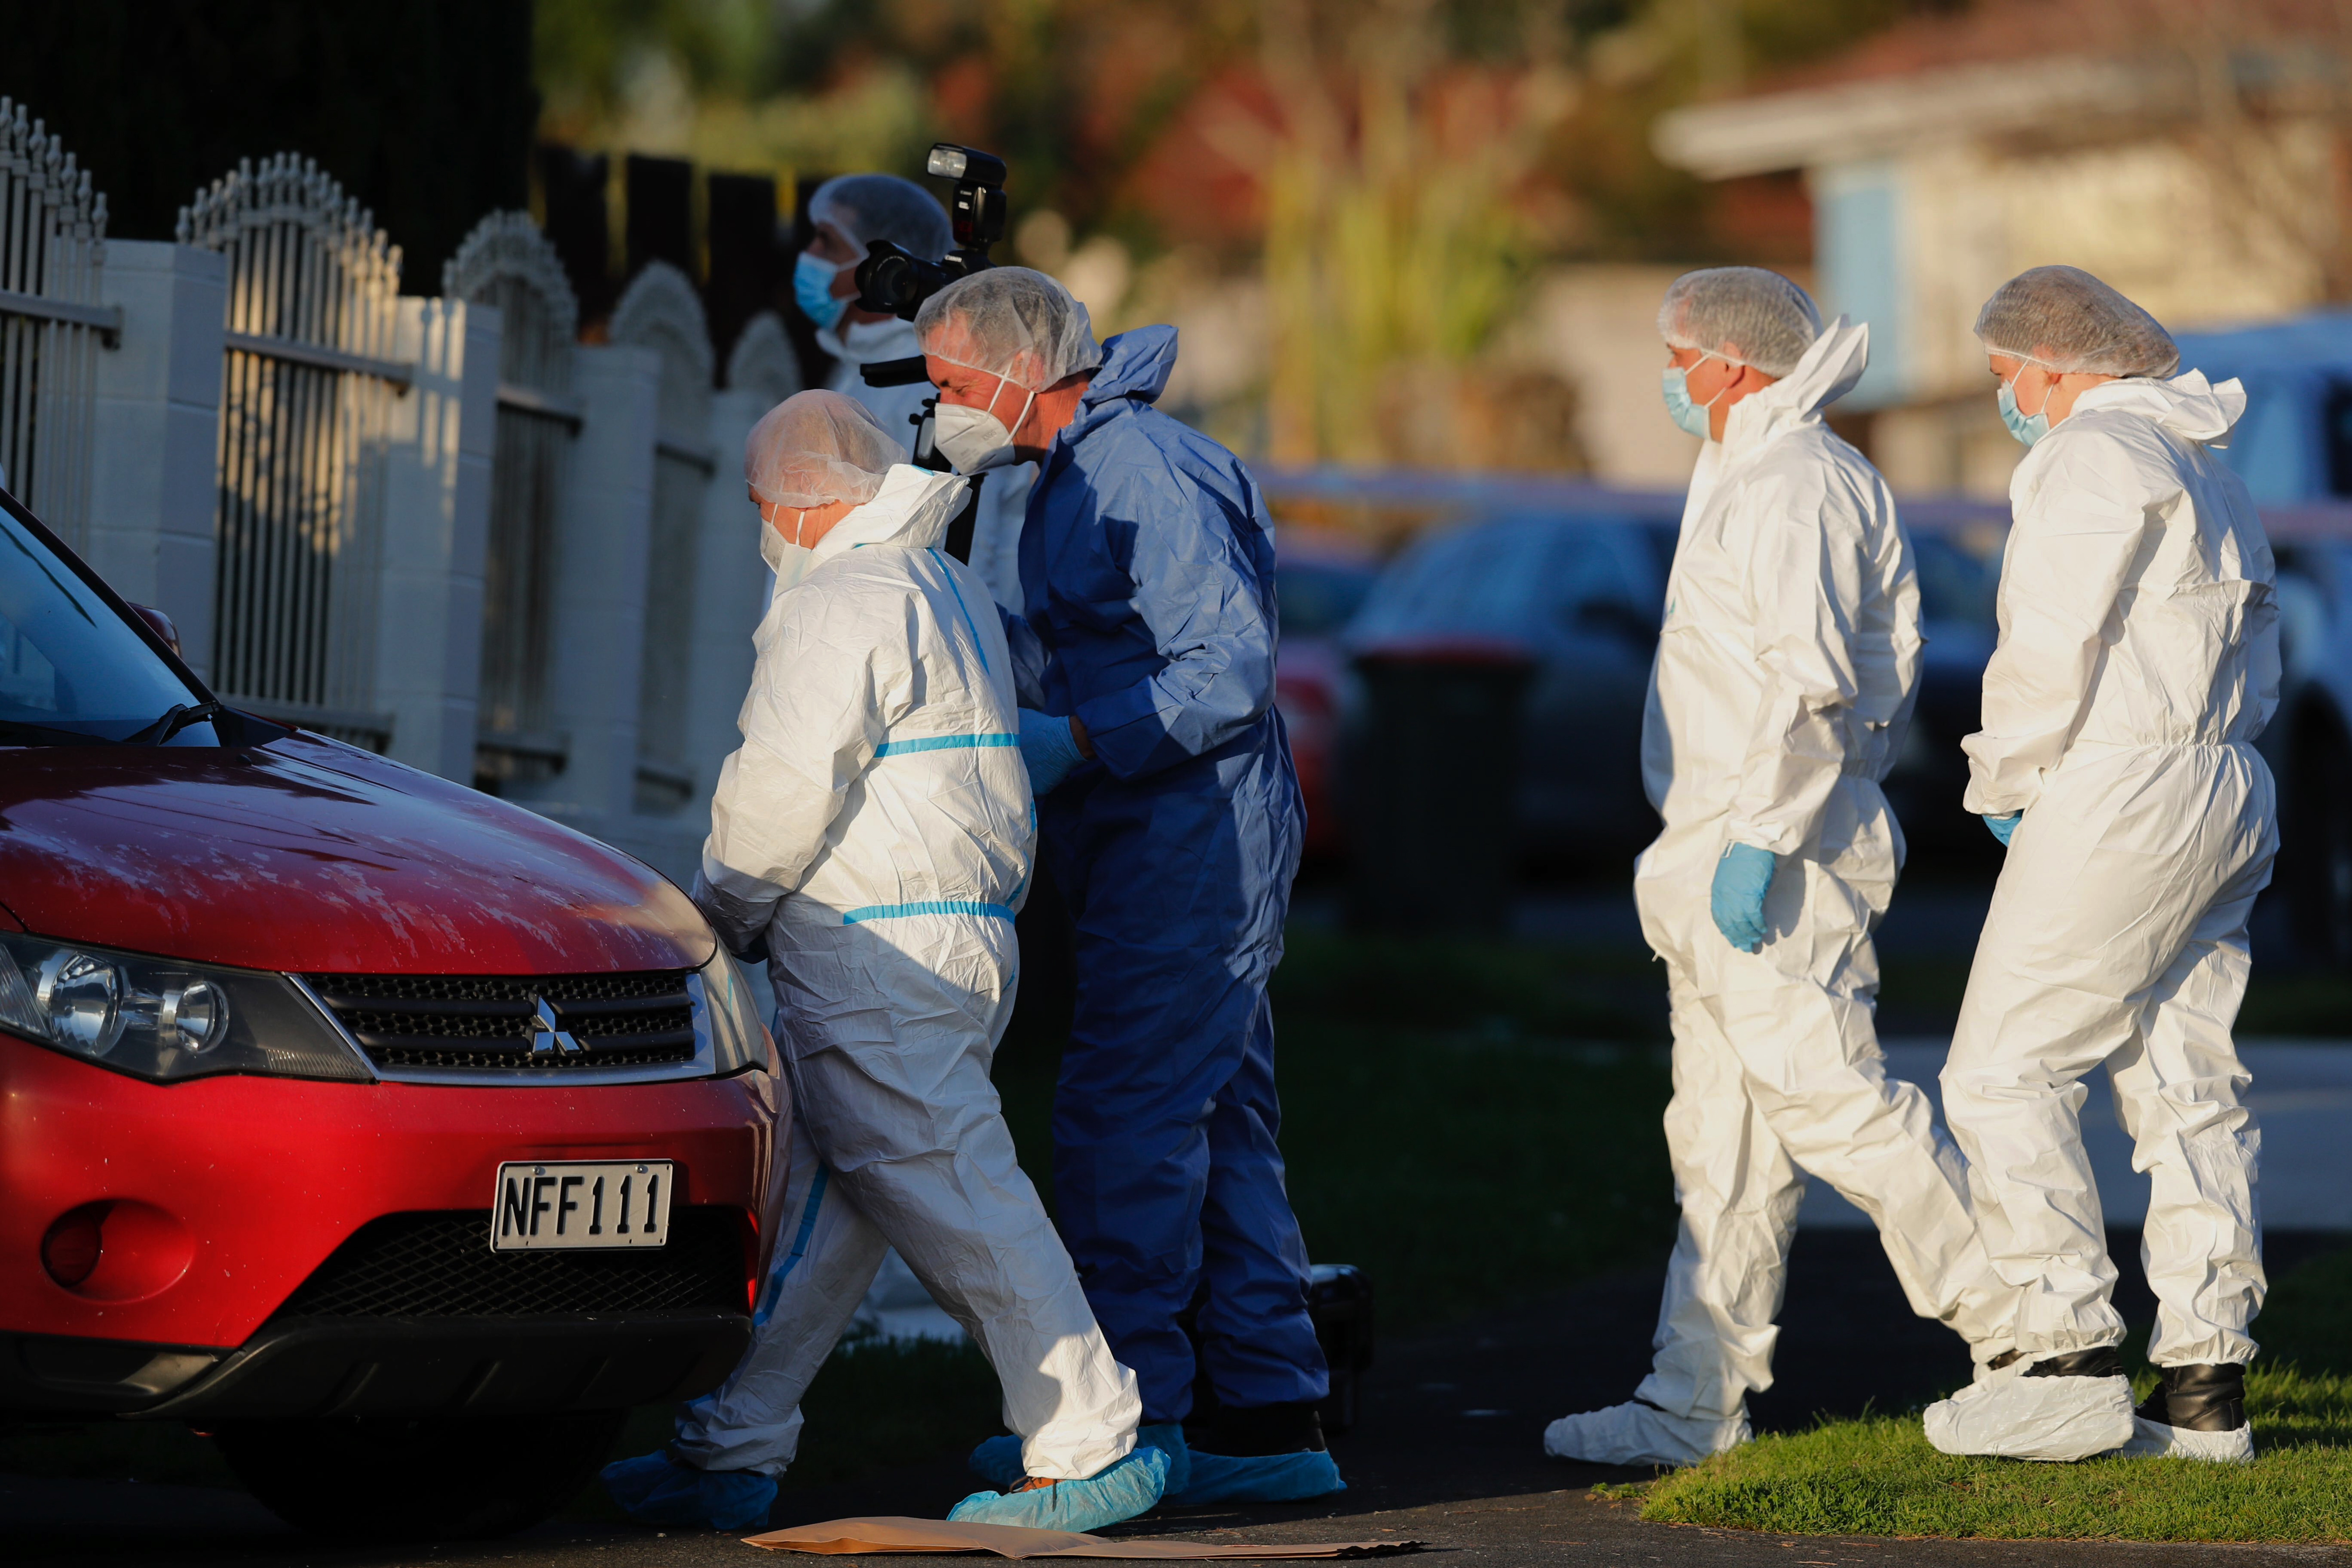 New Zealand police investigators work at a scene in Auckland after bodies were discovered in suitcases 